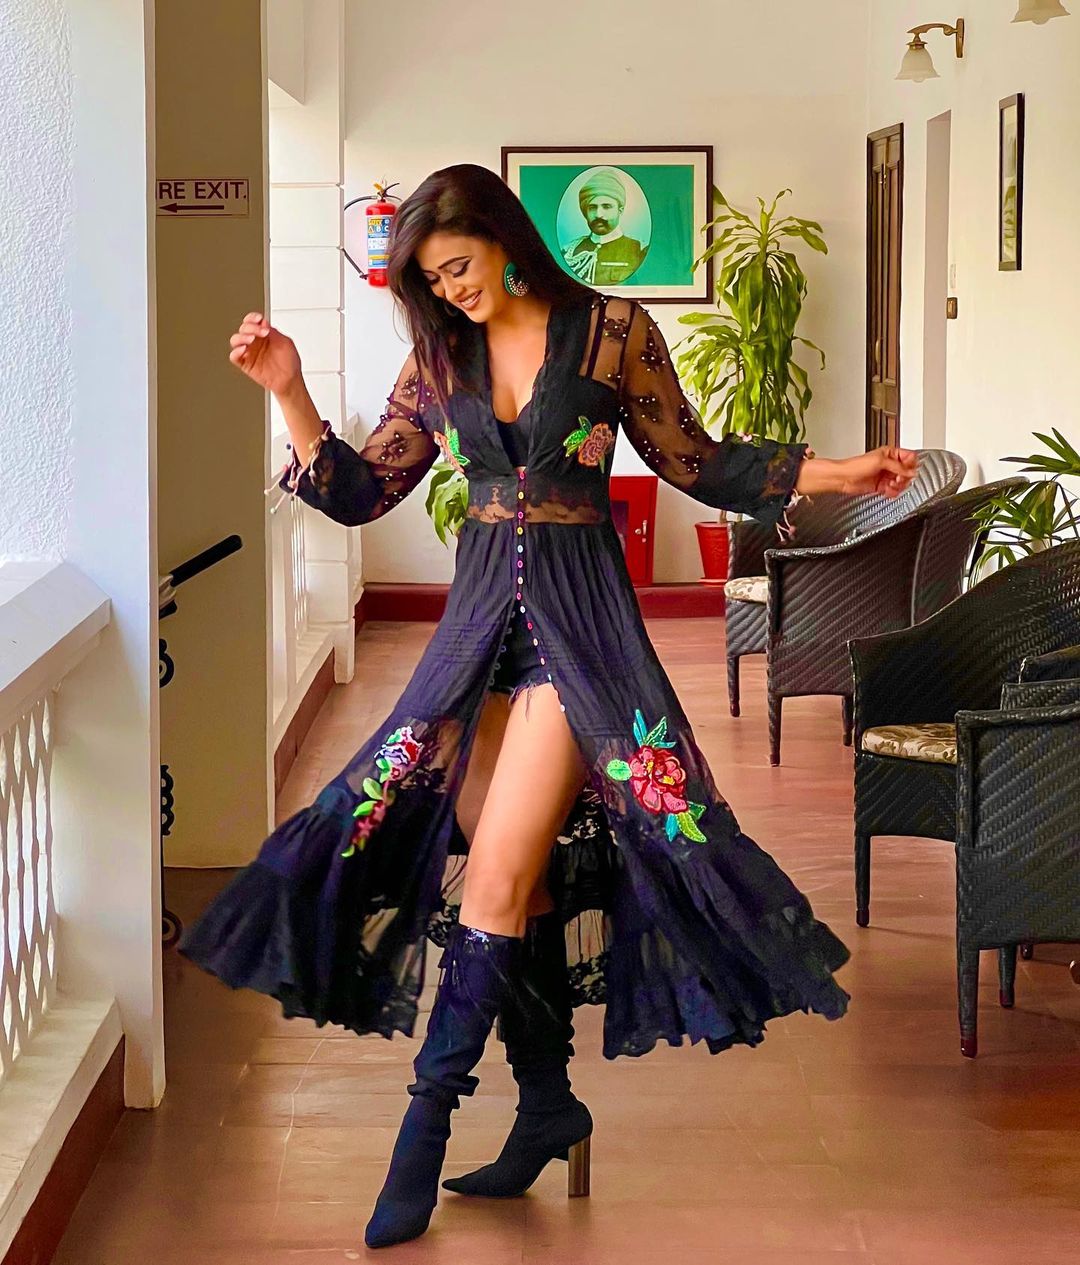 Shweta Tiwari is making heads turn with her latest photoshoot in a black floral dress